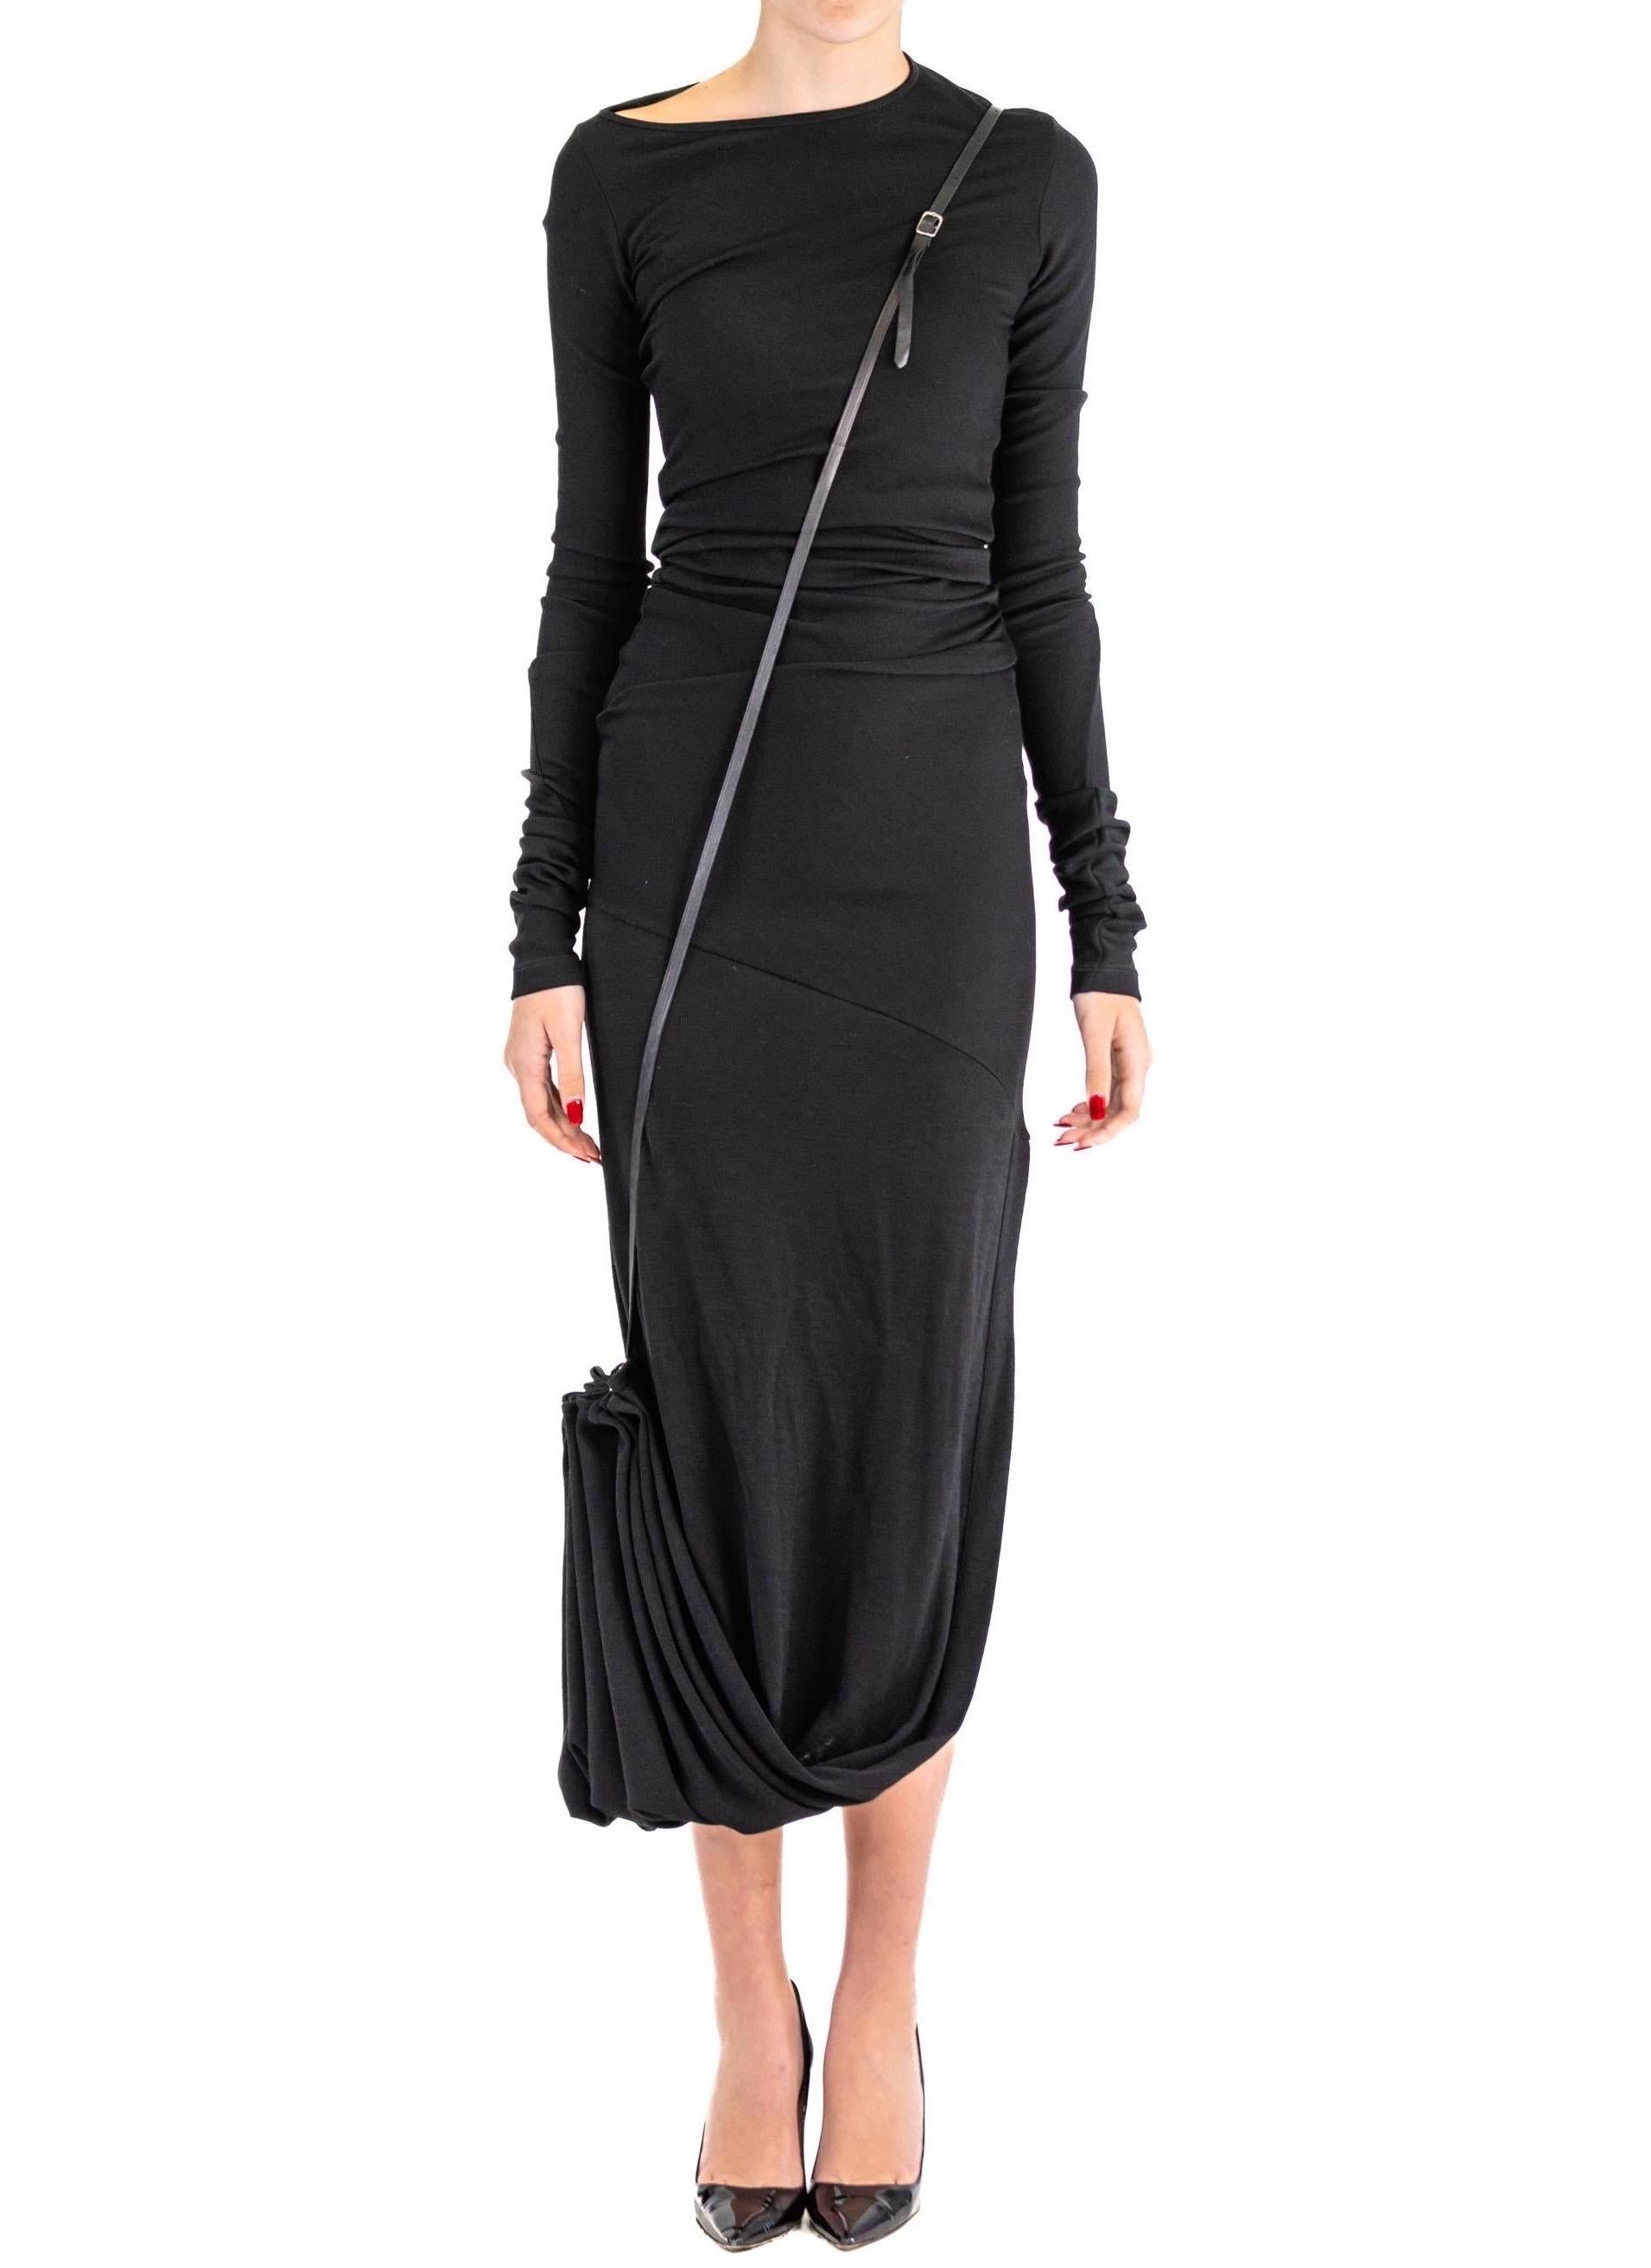 1990S JEAN PAUL GAULTIER Black Wool Blend Knit Dress With Draped Sash In Excellent Condition For Sale In New York, NY